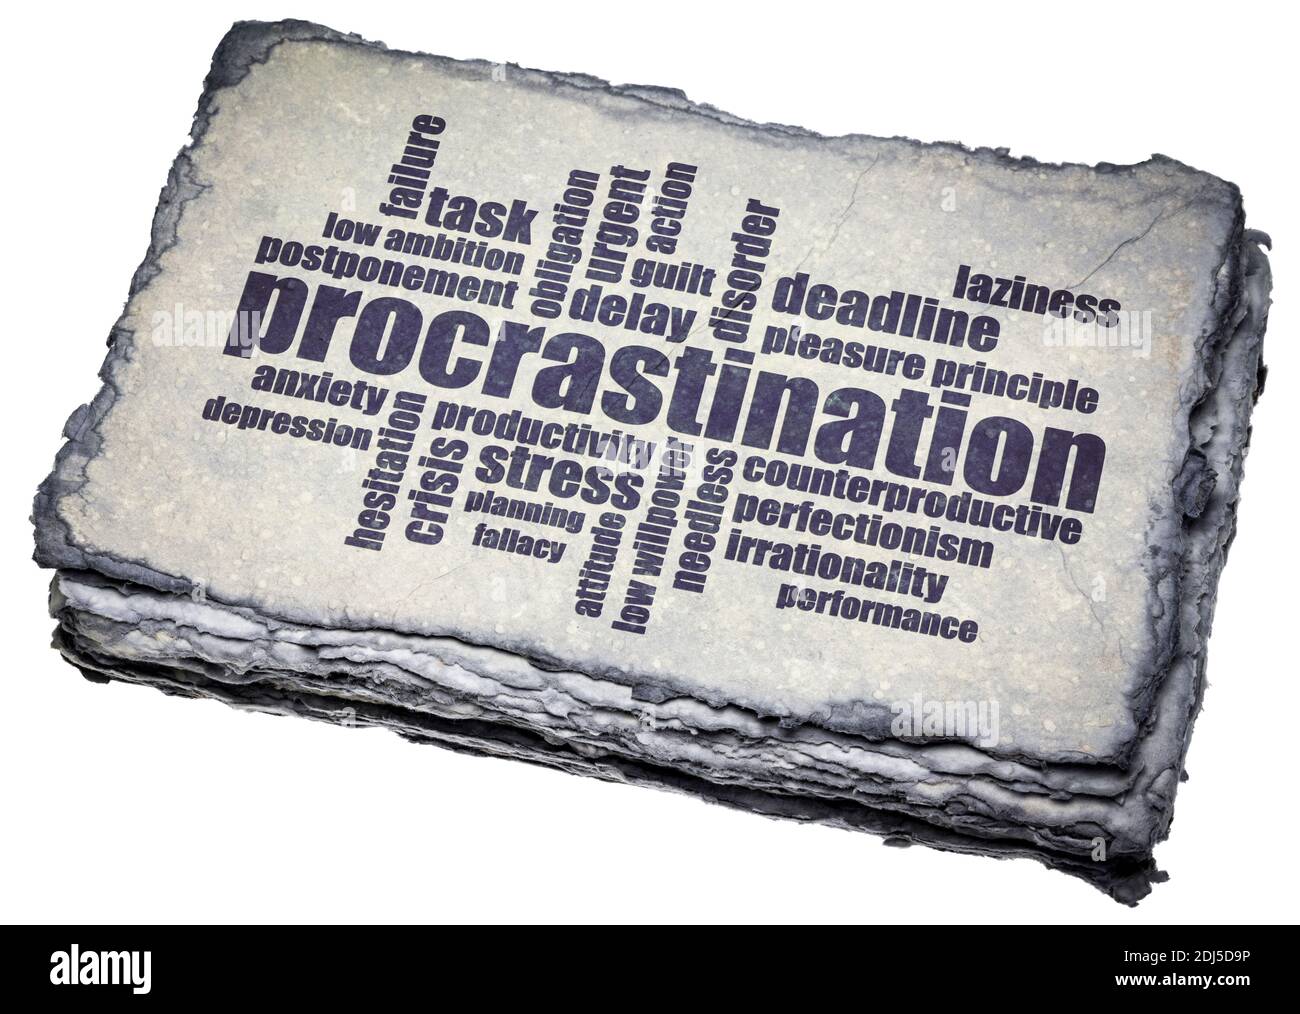 procrastination word cloud on a dark handmade paper, productivity and personal development concept Stock Photo